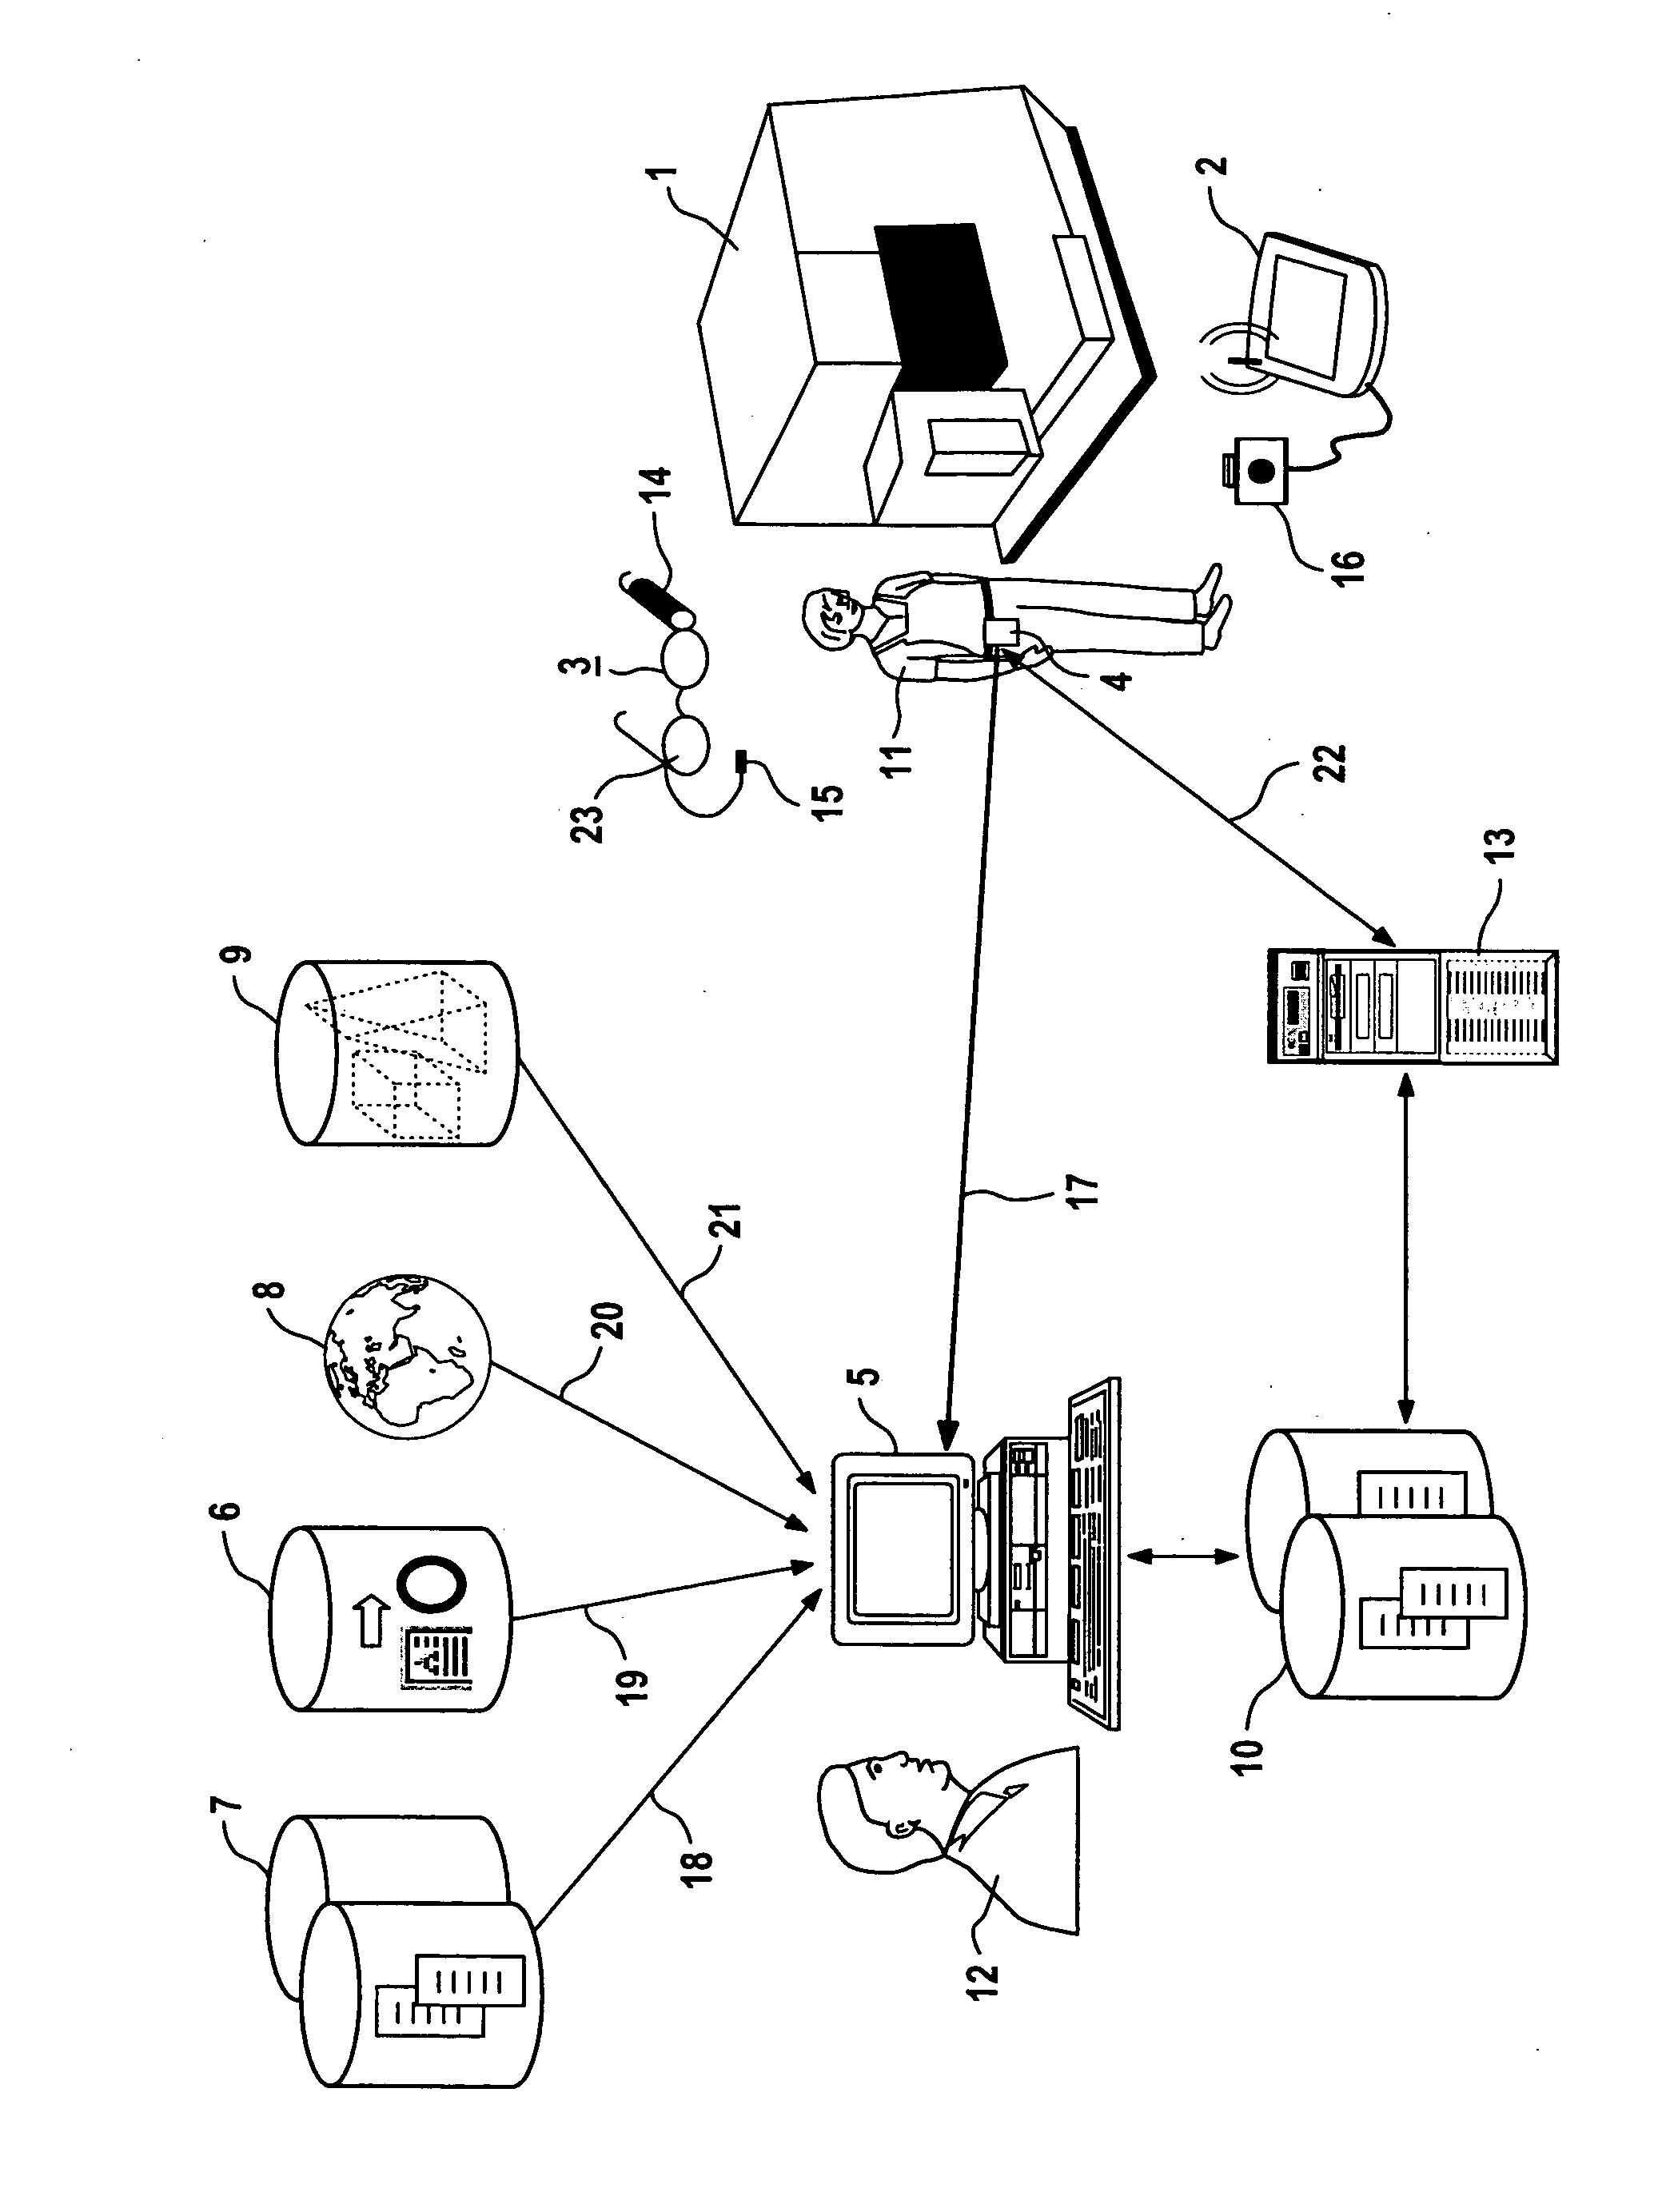 System and method for establising a documentation of working processes for display in an augmented reality system in particular in a production assembly service or maintenance enviroment